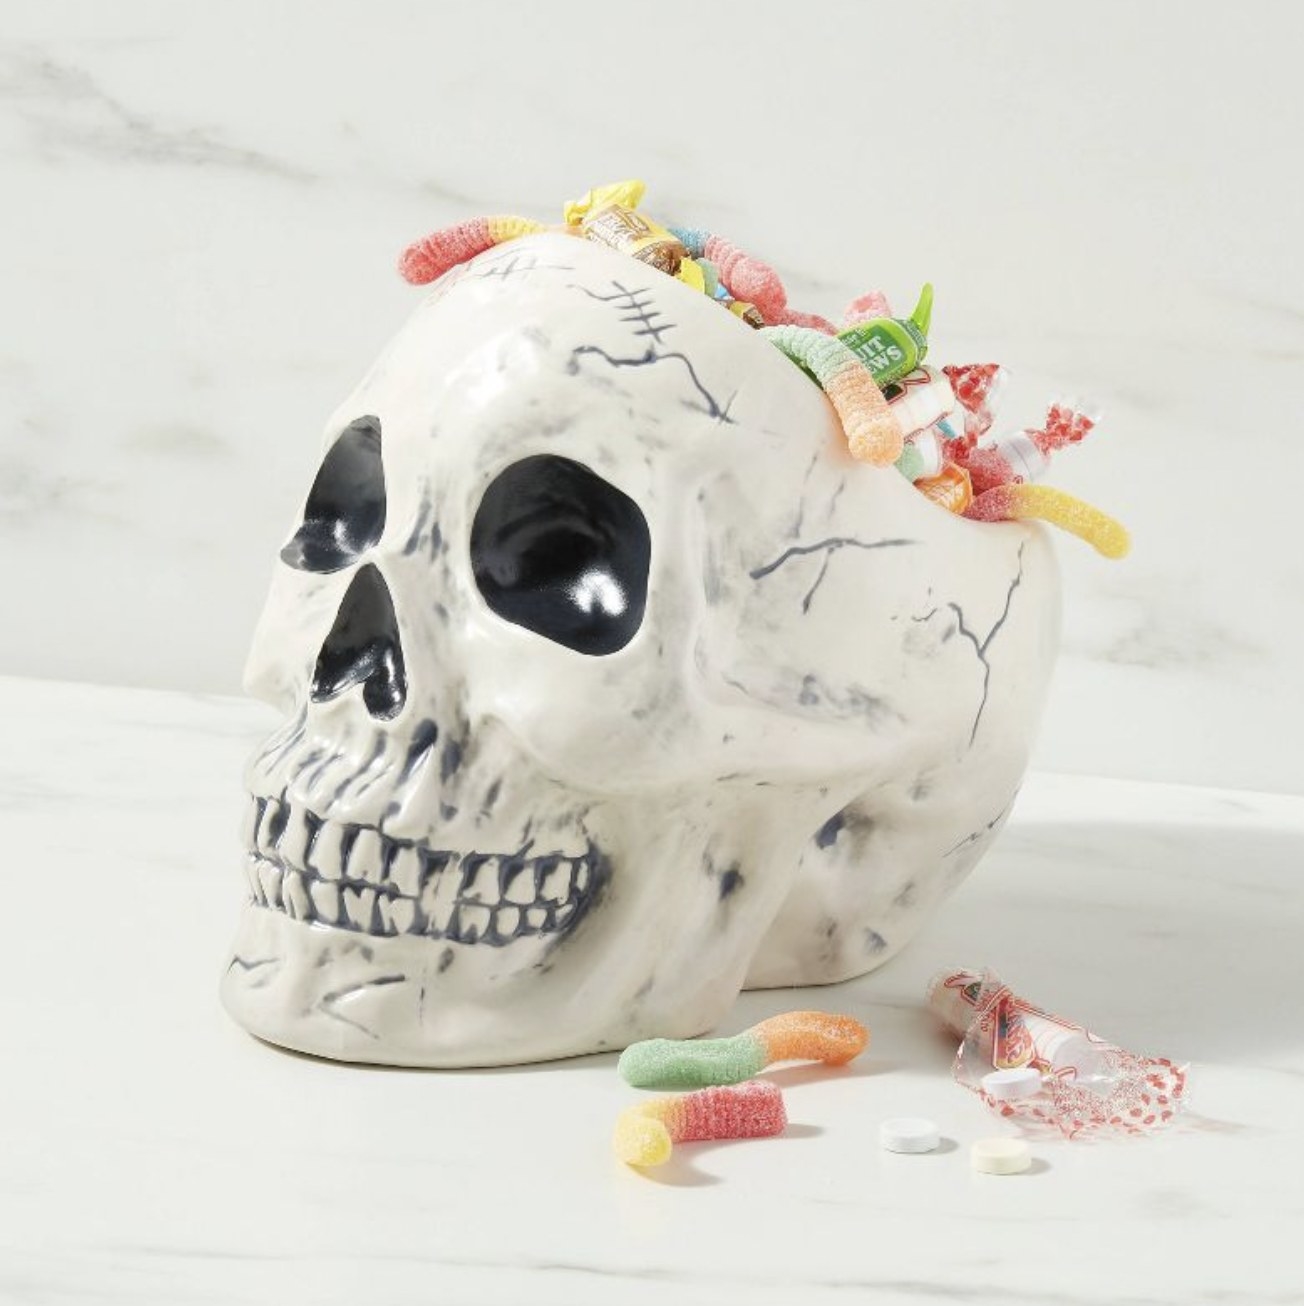 The skull dish with sour gummy worms bursting out the opening in the top